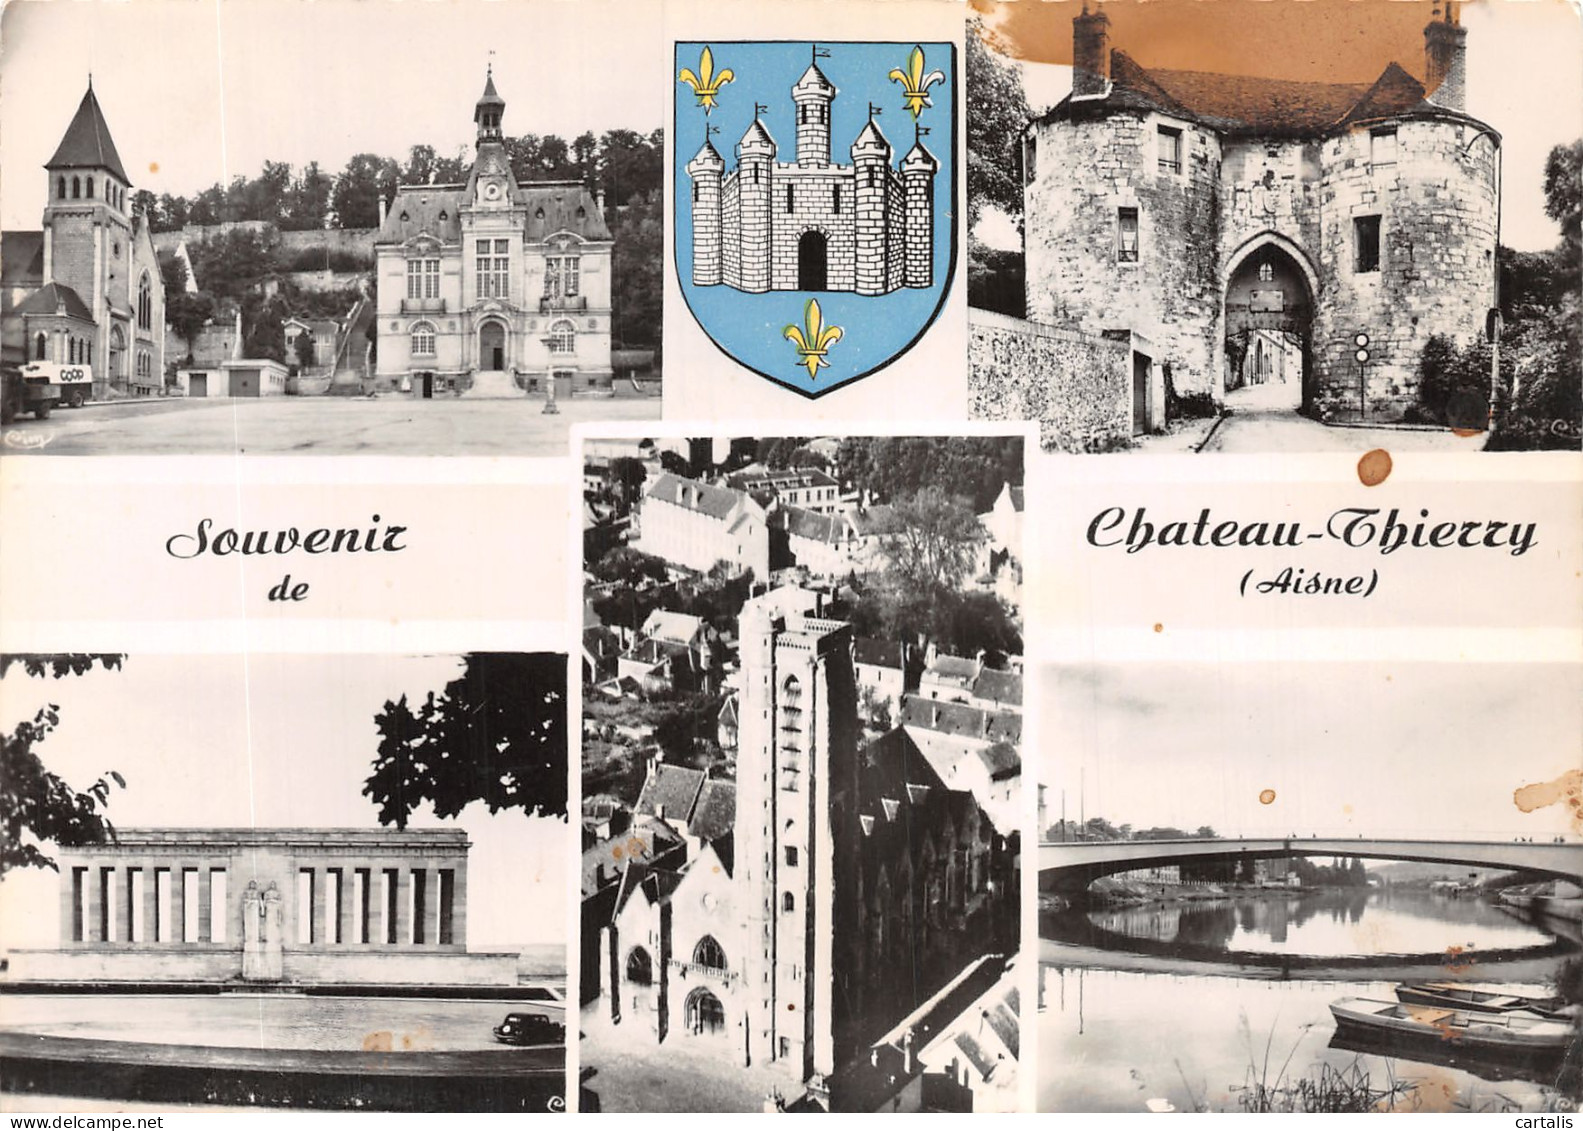 02-CHATEAU THIERRY-N°4184-C/0233 - Chateau Thierry